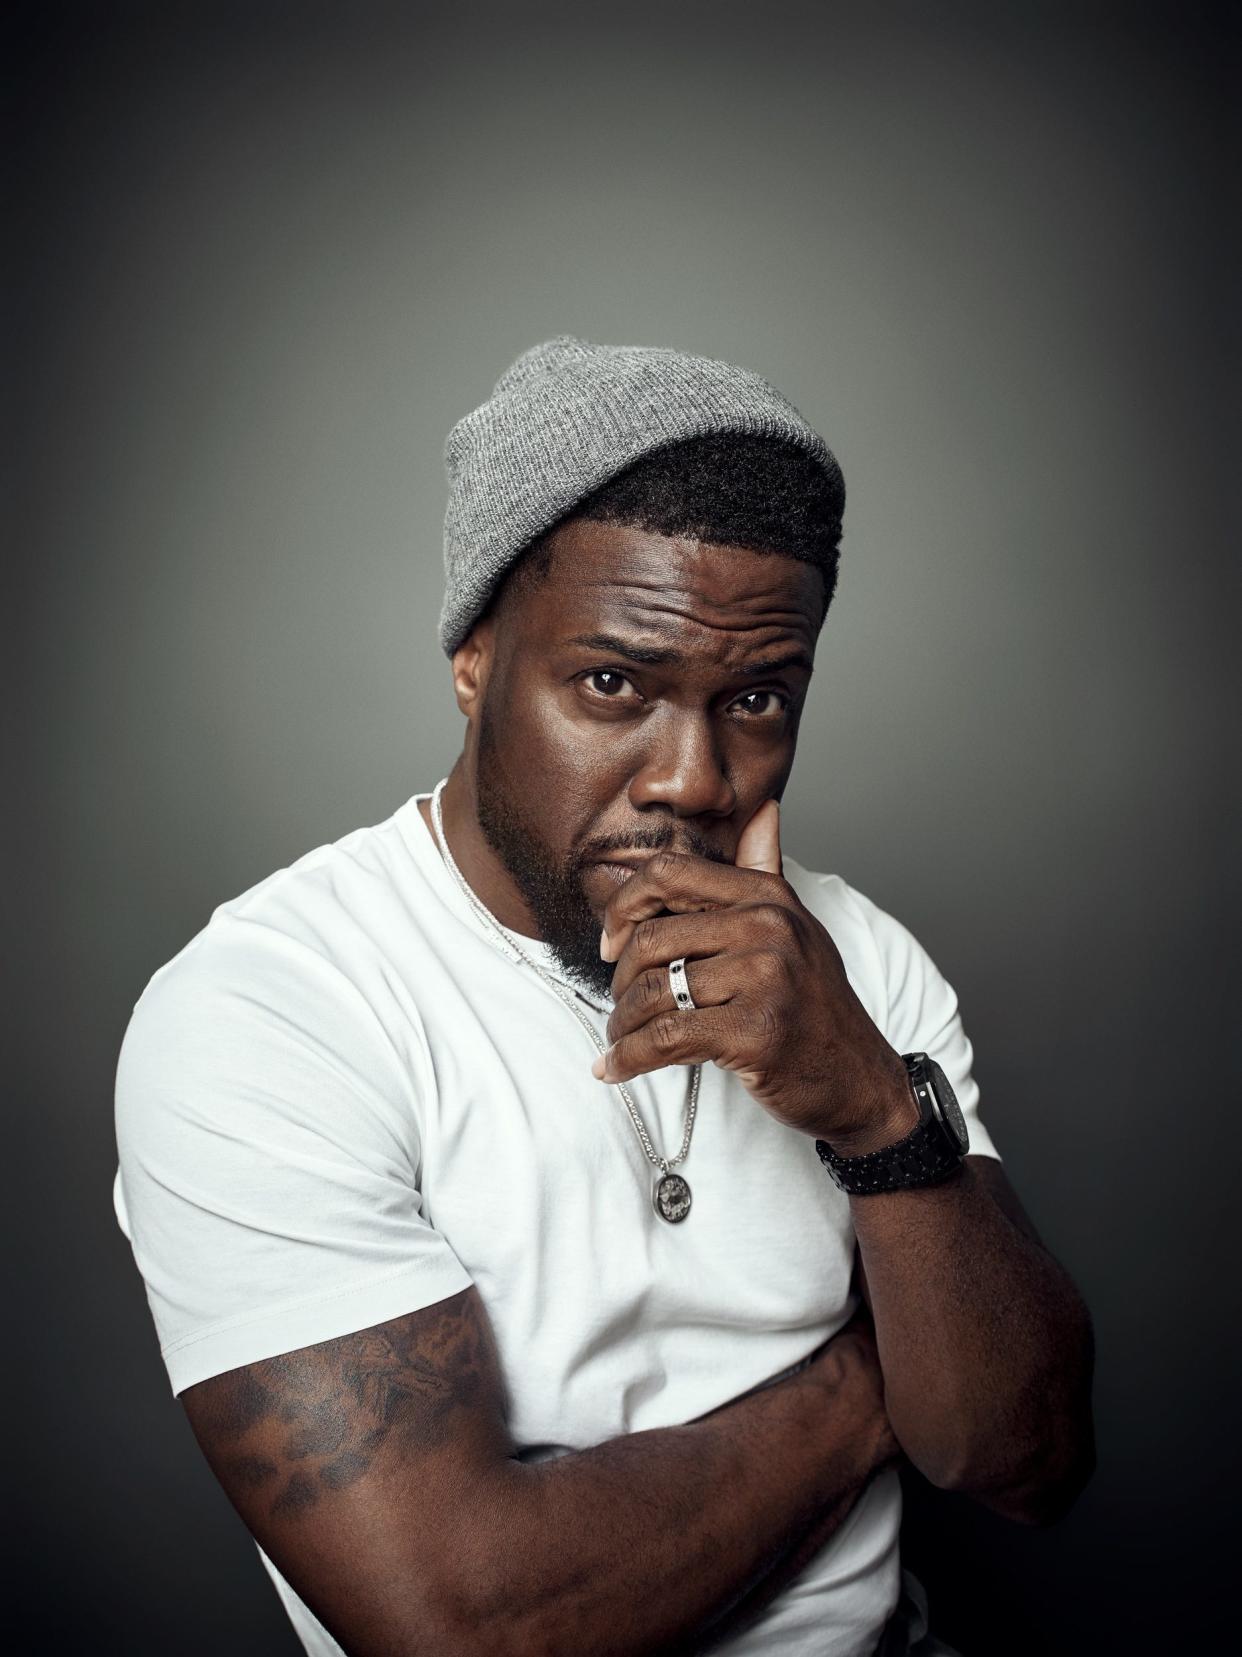 Star comedian and popular Hollywood actor Kevin Hart will bring his stand-up act to Tom Benson Hall of Fame Stadium on May 18 at Hall of Fame Village in Canton. Tickets go on sale Friday.